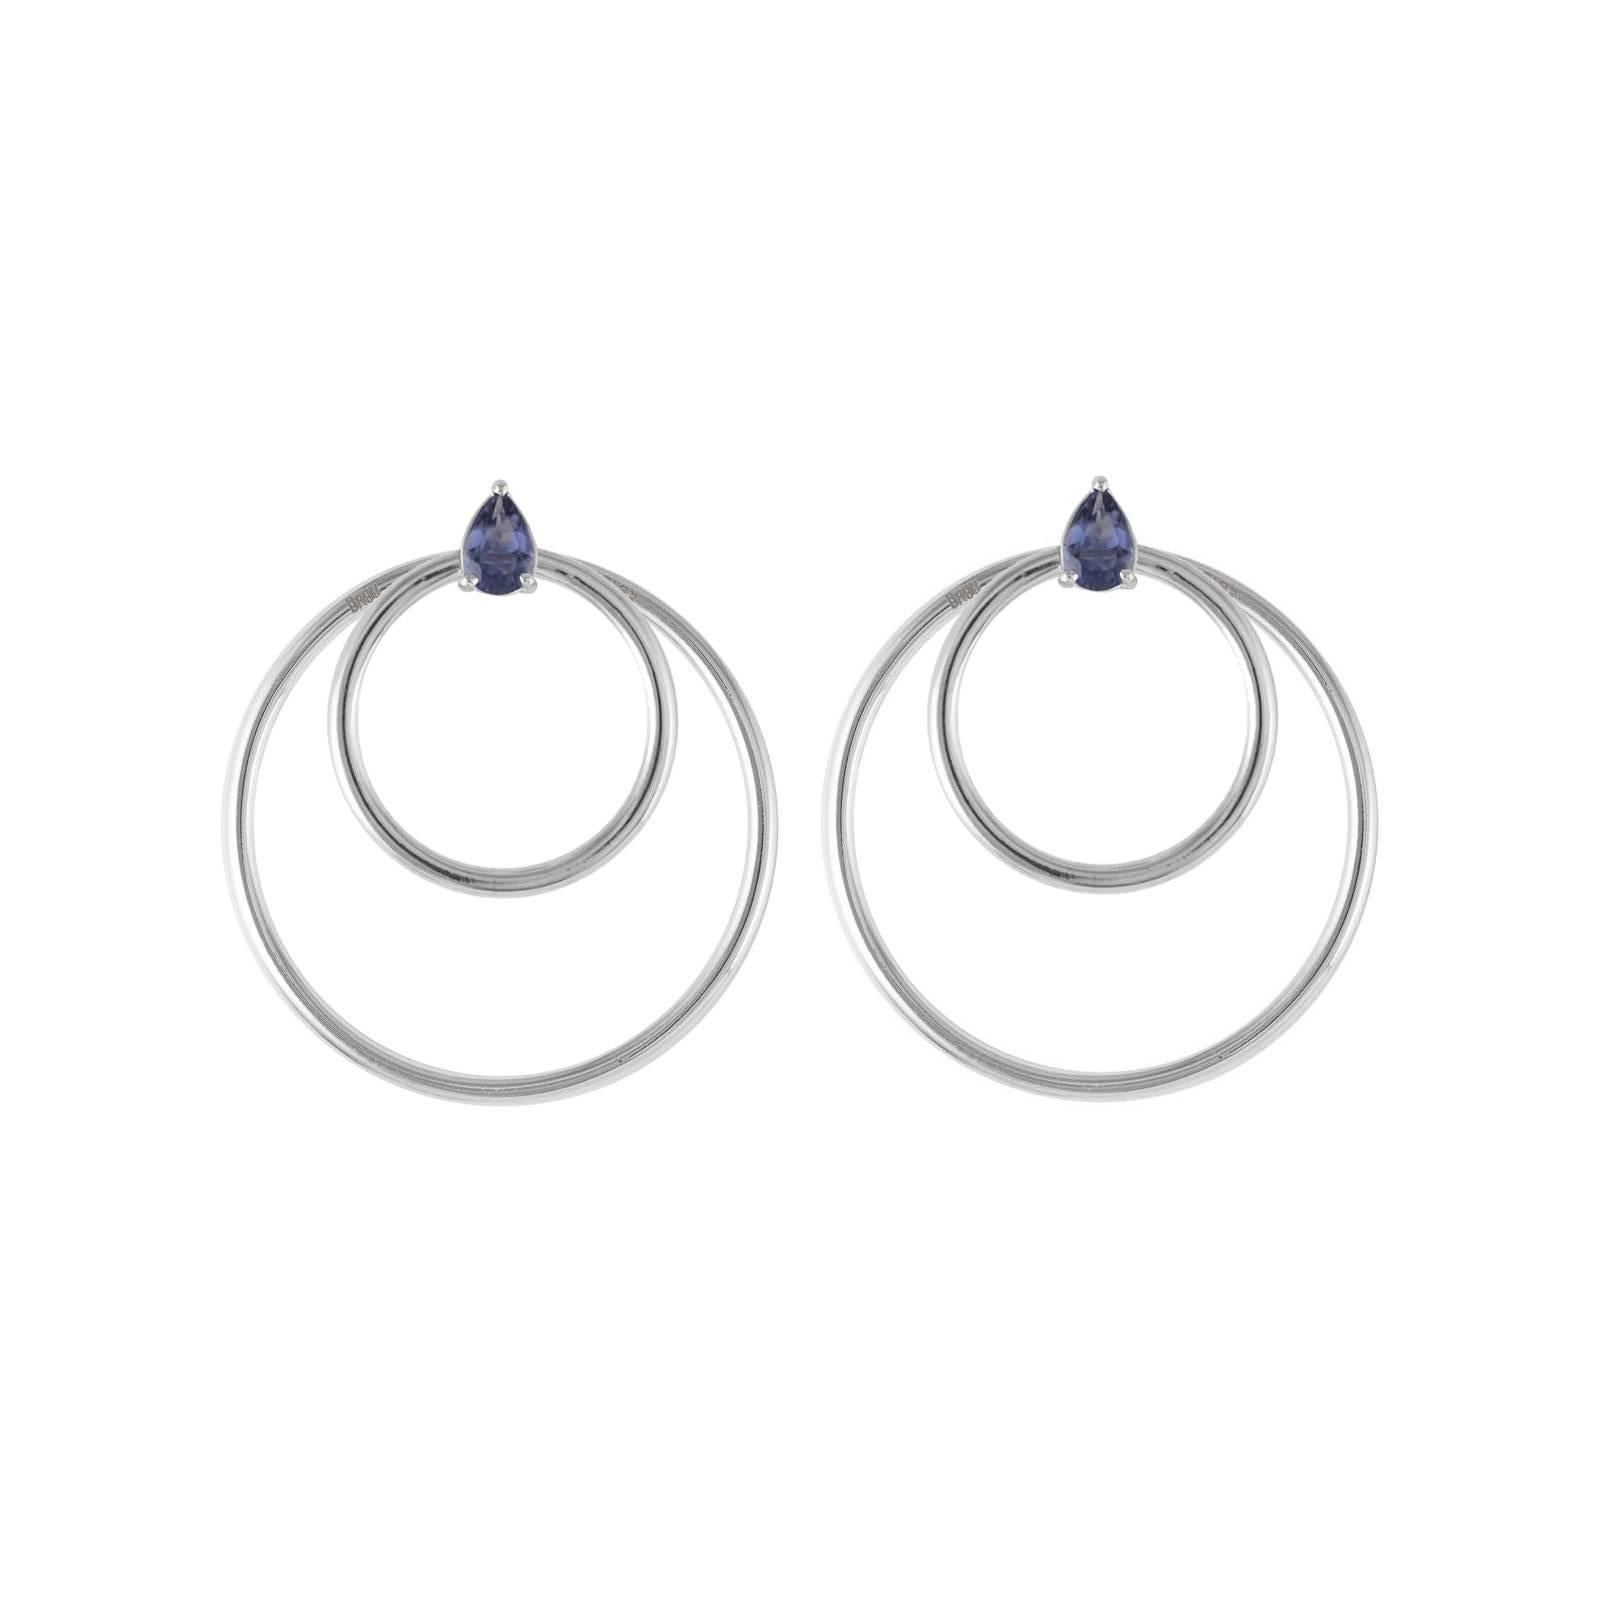 Large Double Orbit Hoop Multiplier earring jackets in 18 karat white gold are an innovative addition to any bar fastening earrings. The front facing hoops slip on to the bar or any earring and immediately create an elegantly balanced double hoop